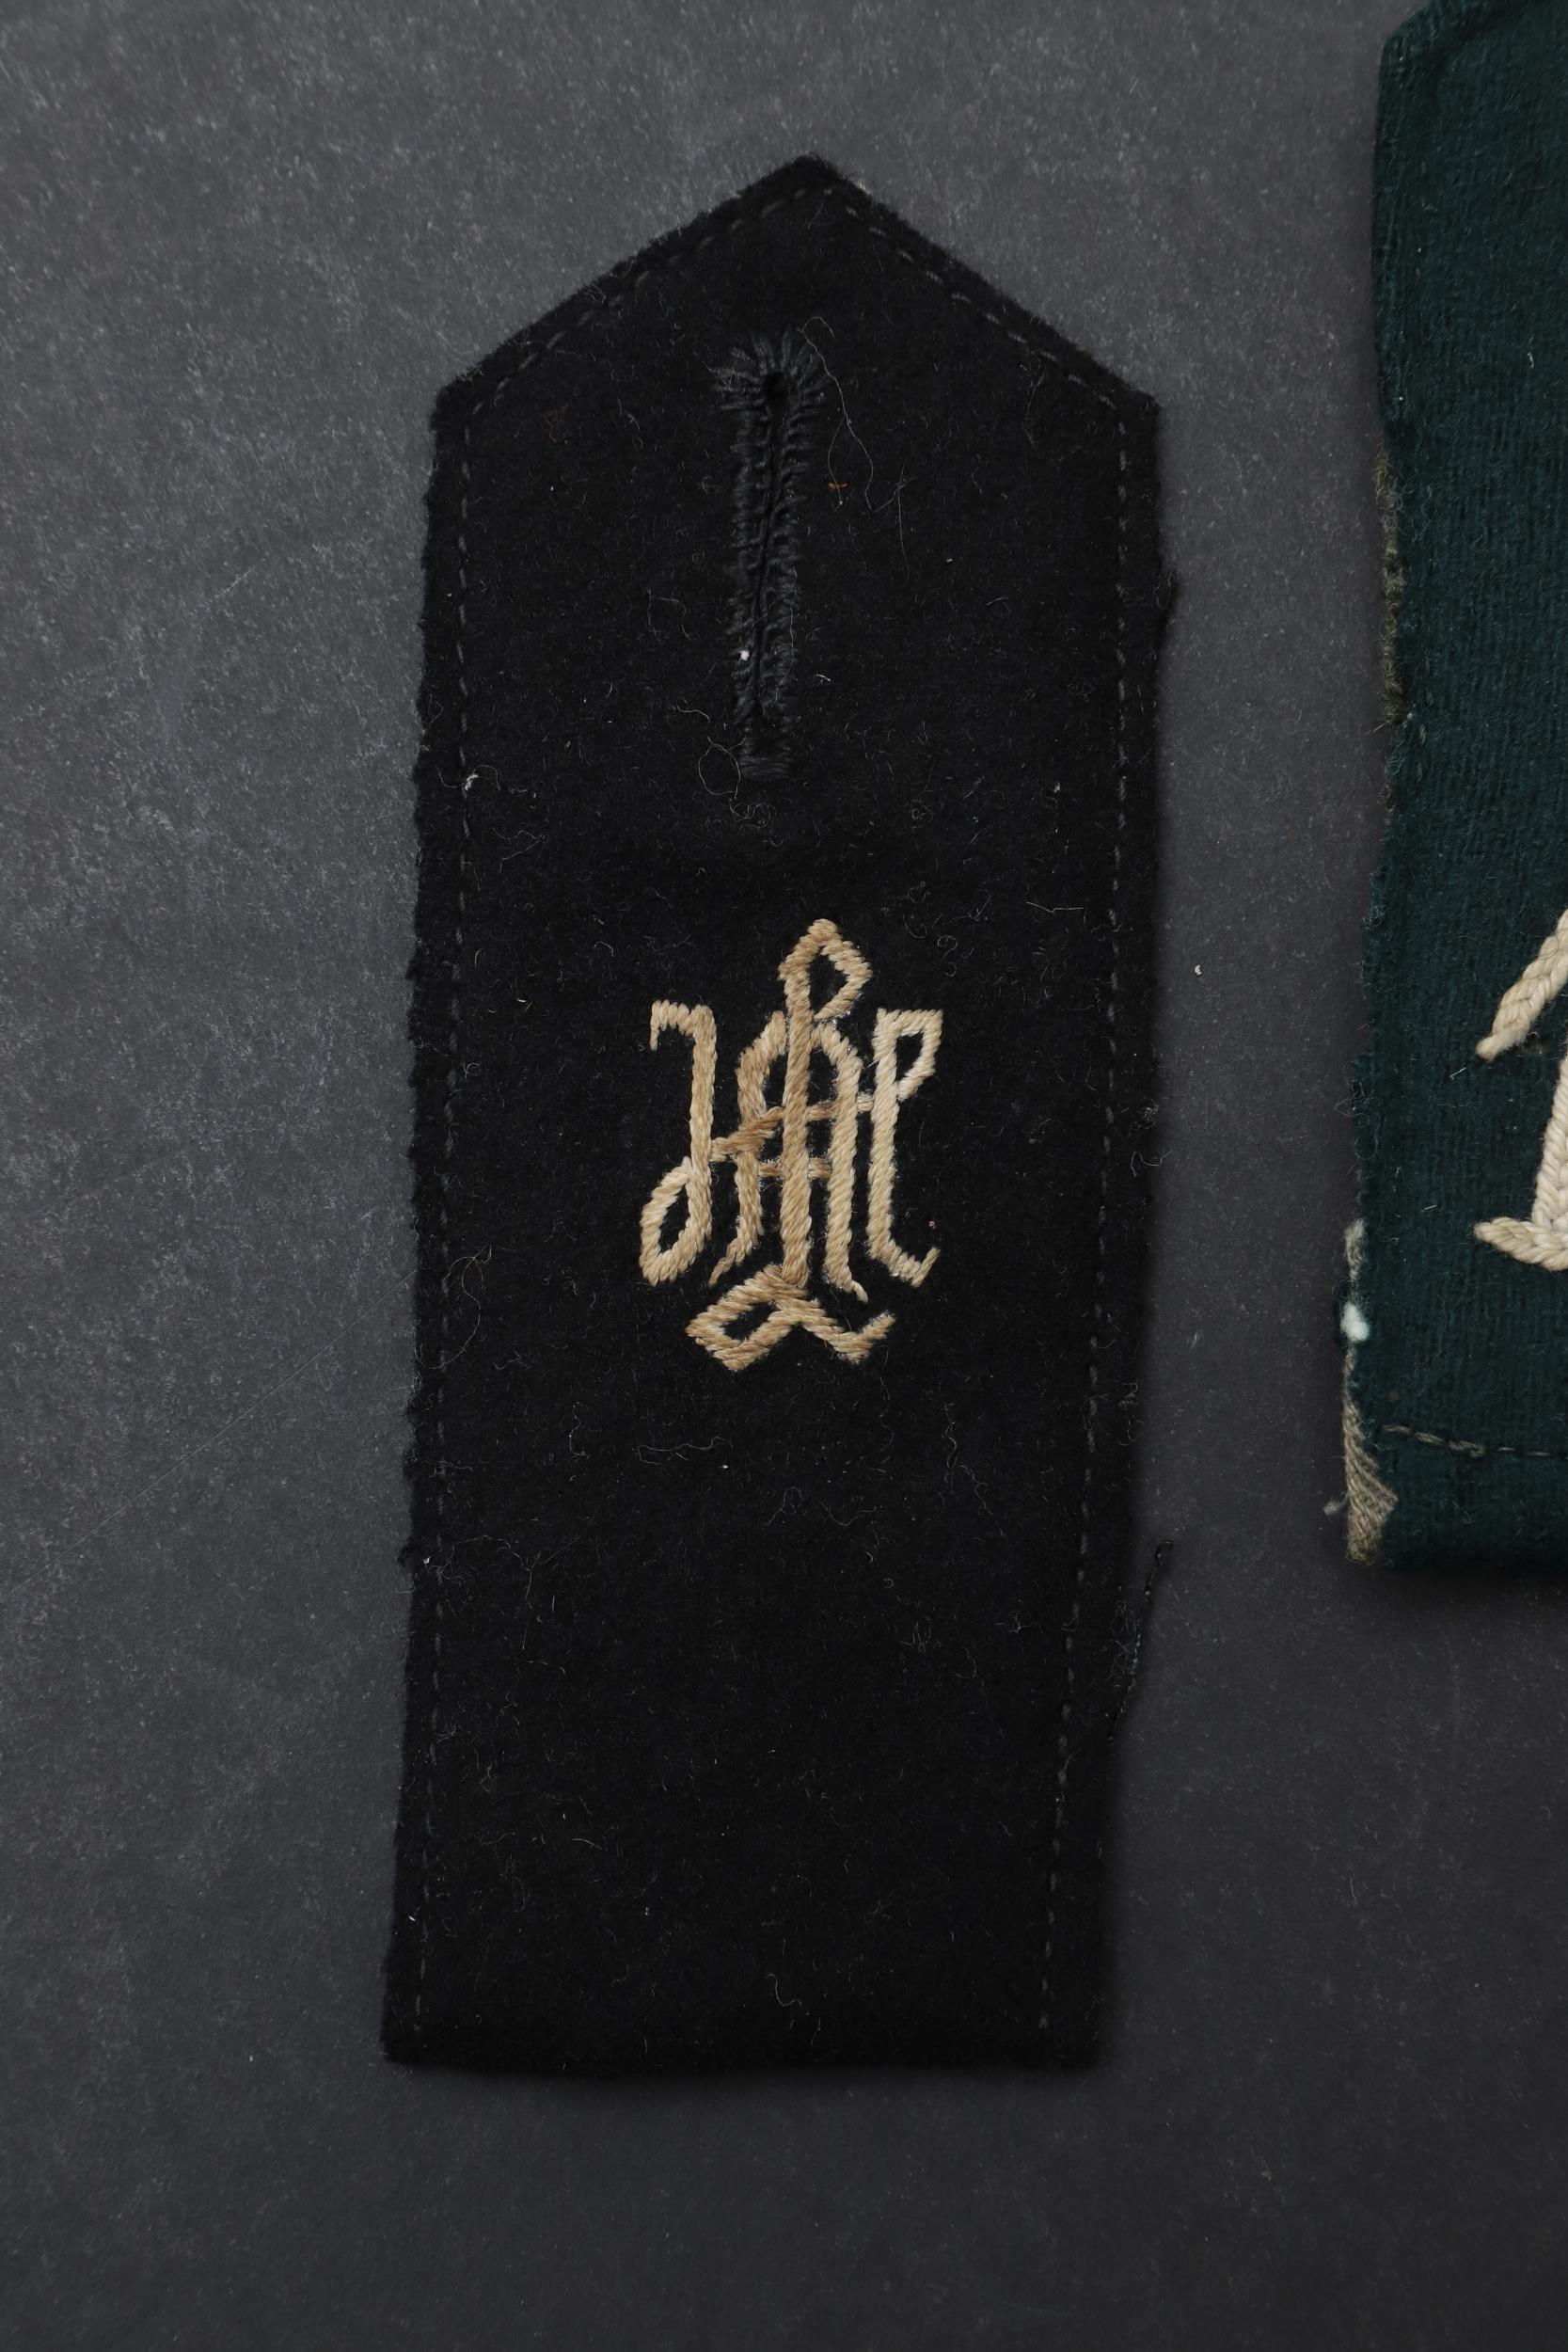 A SECOND WORLD WAR GERMAN WAFFEN-SS SHOULDER STRAP AND ANOTHER SIMILAR. - Image 2 of 4